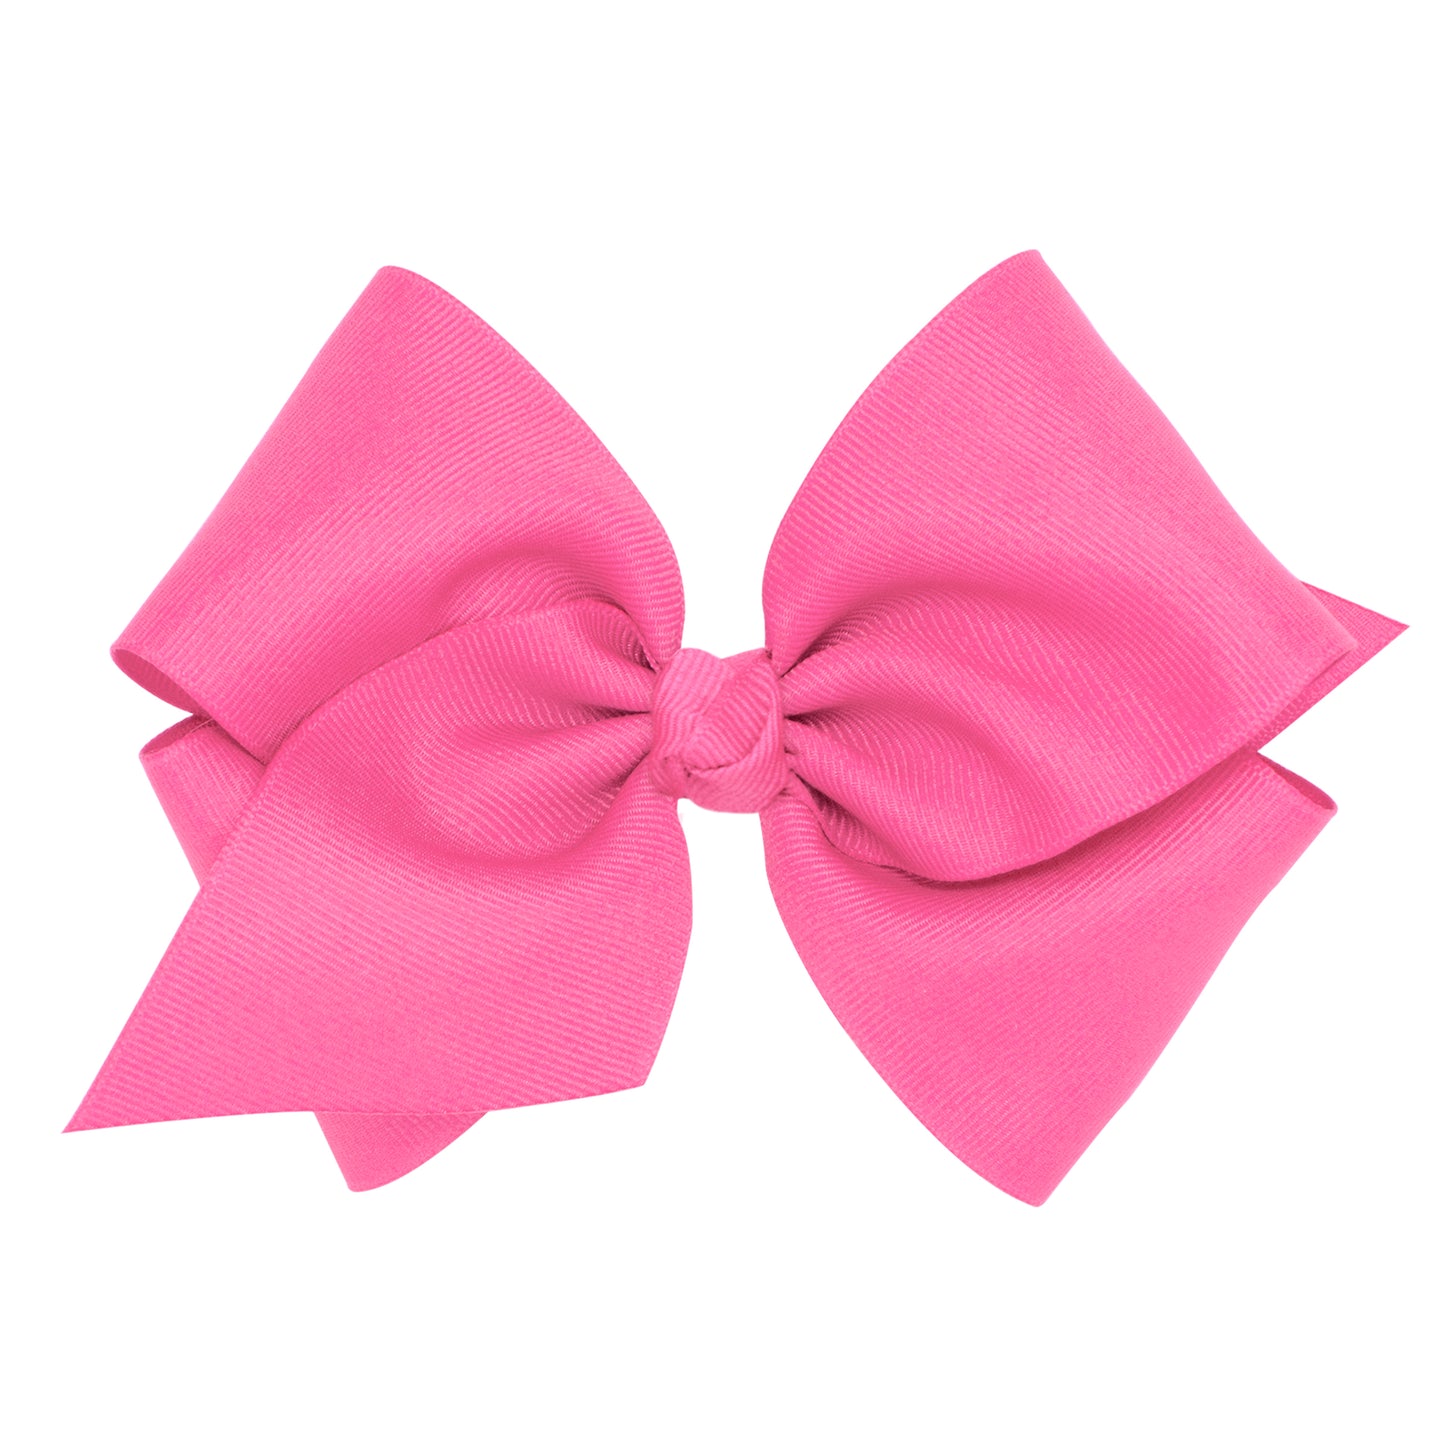 King Grosgrain Hair Bow with Center Knot - Hot Pink